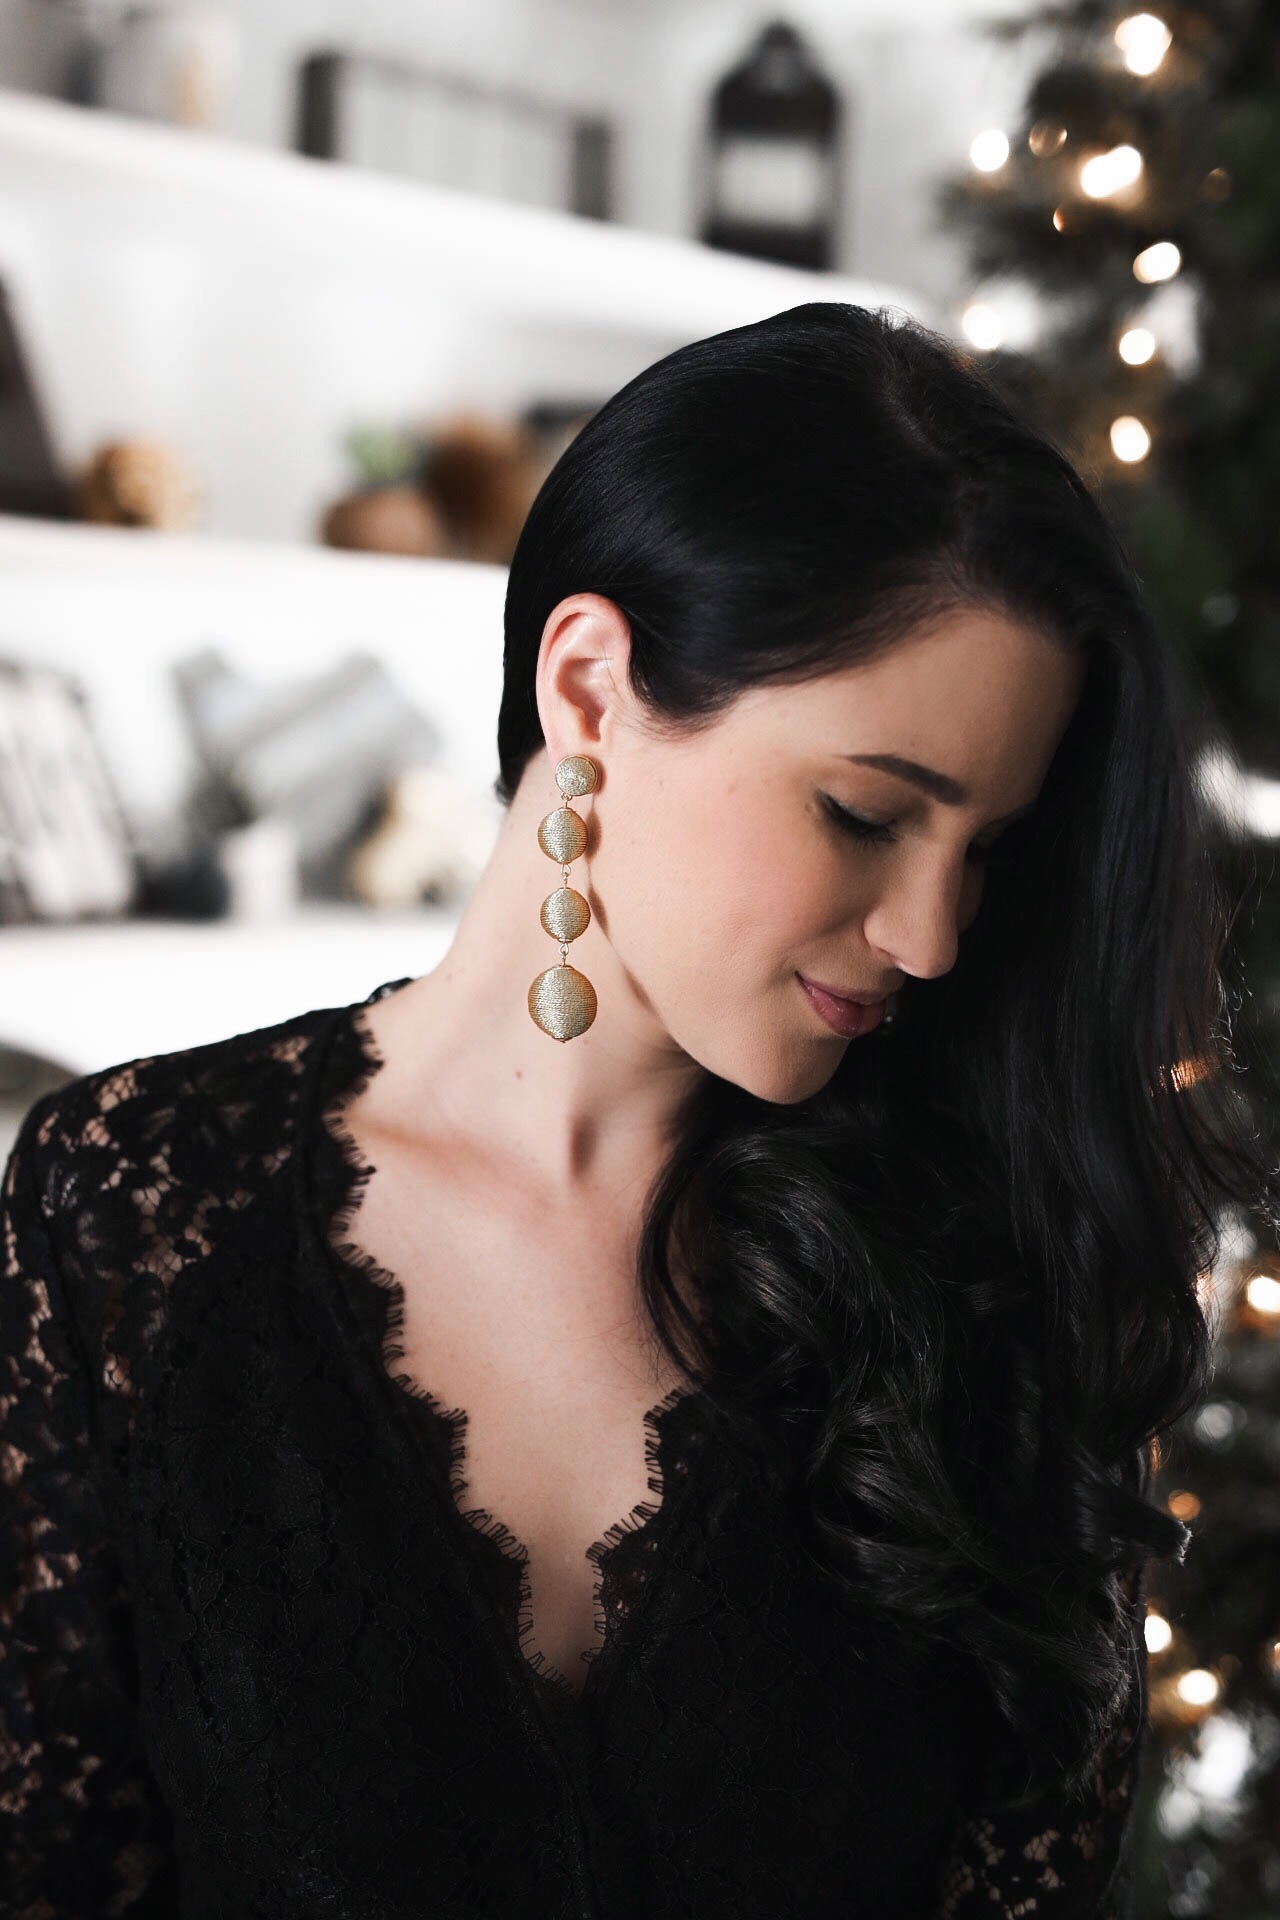 DTKAustin shares her go-to holiday jewelry with Baublebar. Save 25% with code GIFT25! | Baublebar Jewelry Best Sellers | Holiday Gift Guide | holiday jewelry | what to wear for the holidays | holiday accessories || Dressed to Kill #holidayjewelry #baublebar #holidayaccessories